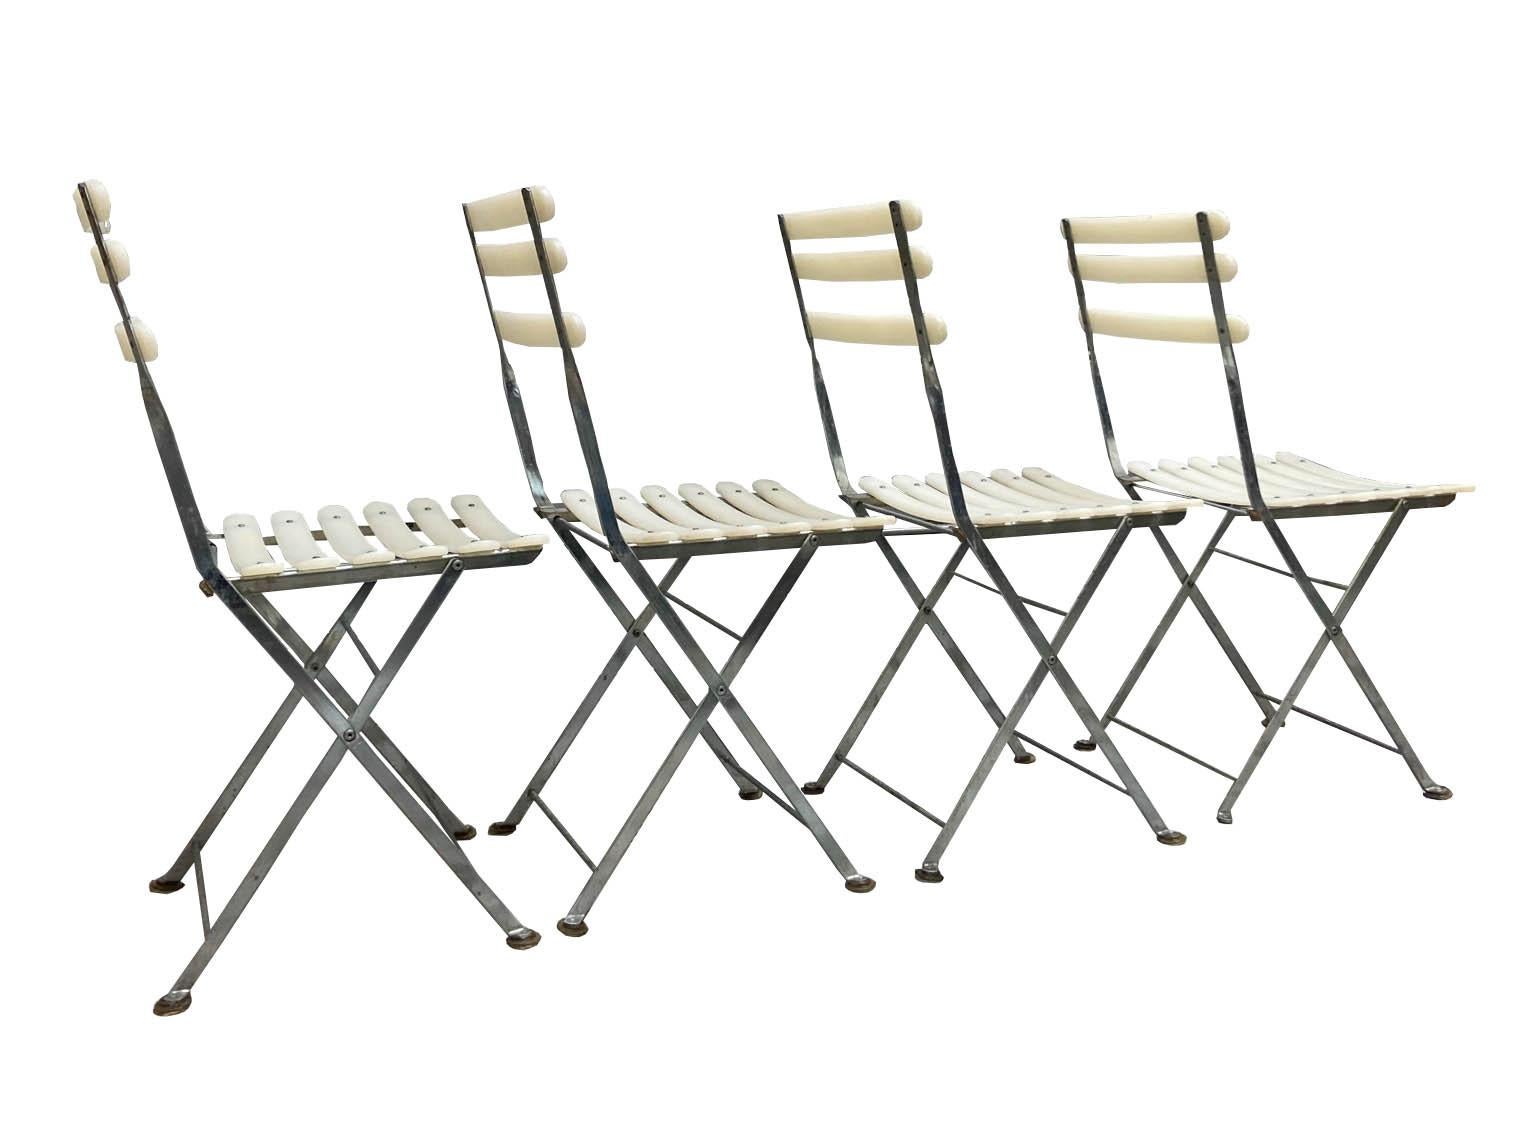 Group of 4 folding chairs suitable for home balconies or large green gardens.